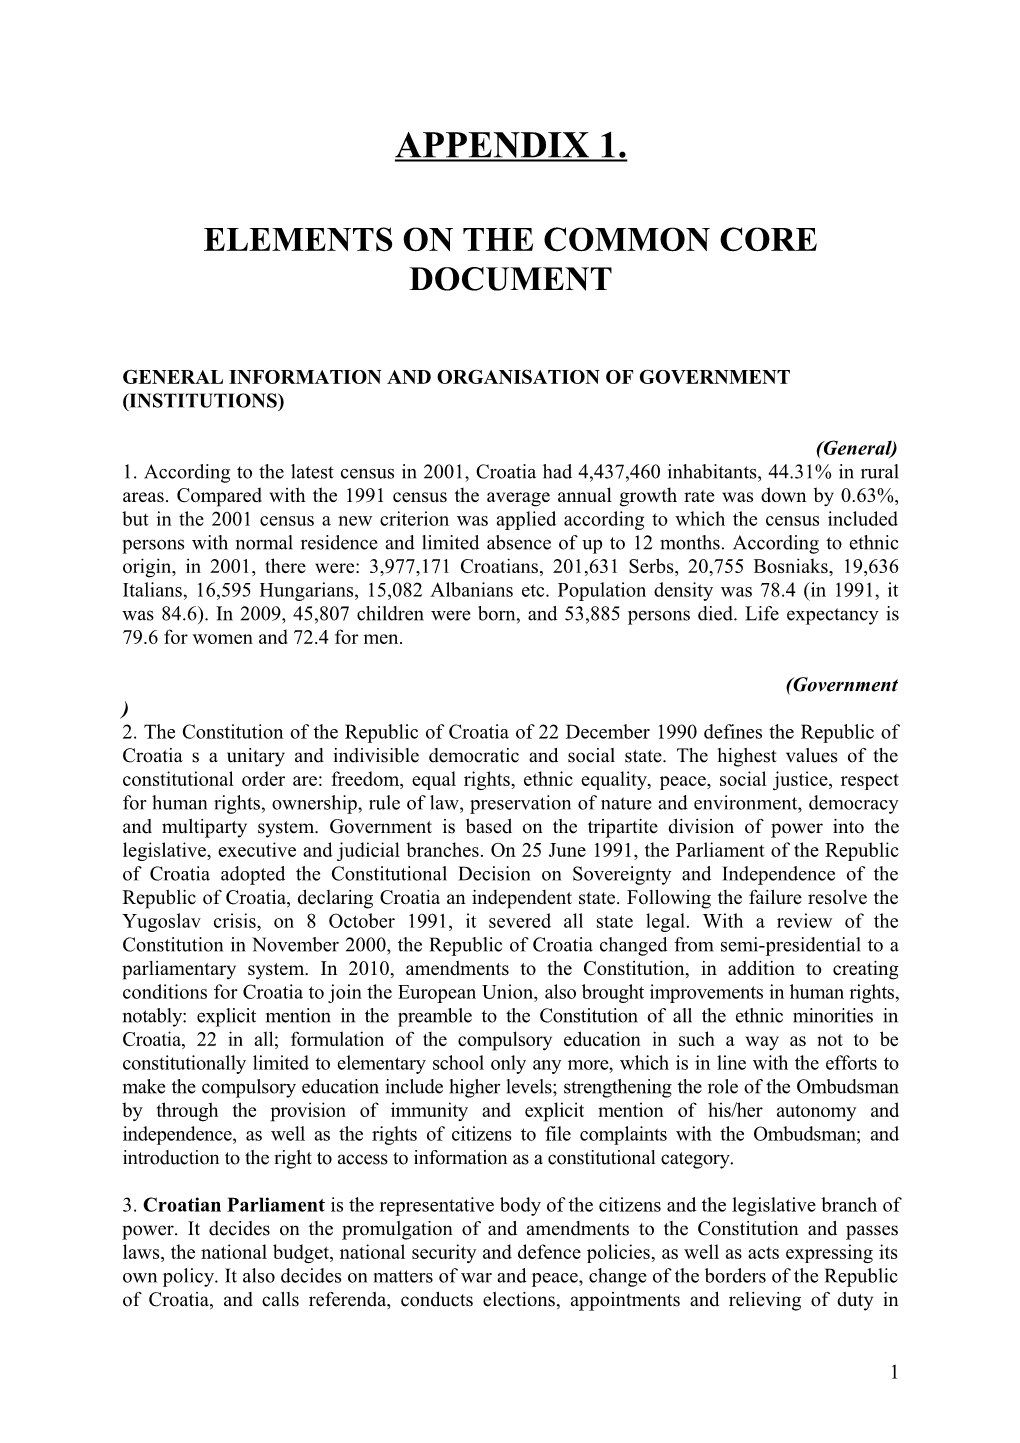 Elements on the Common Core Document